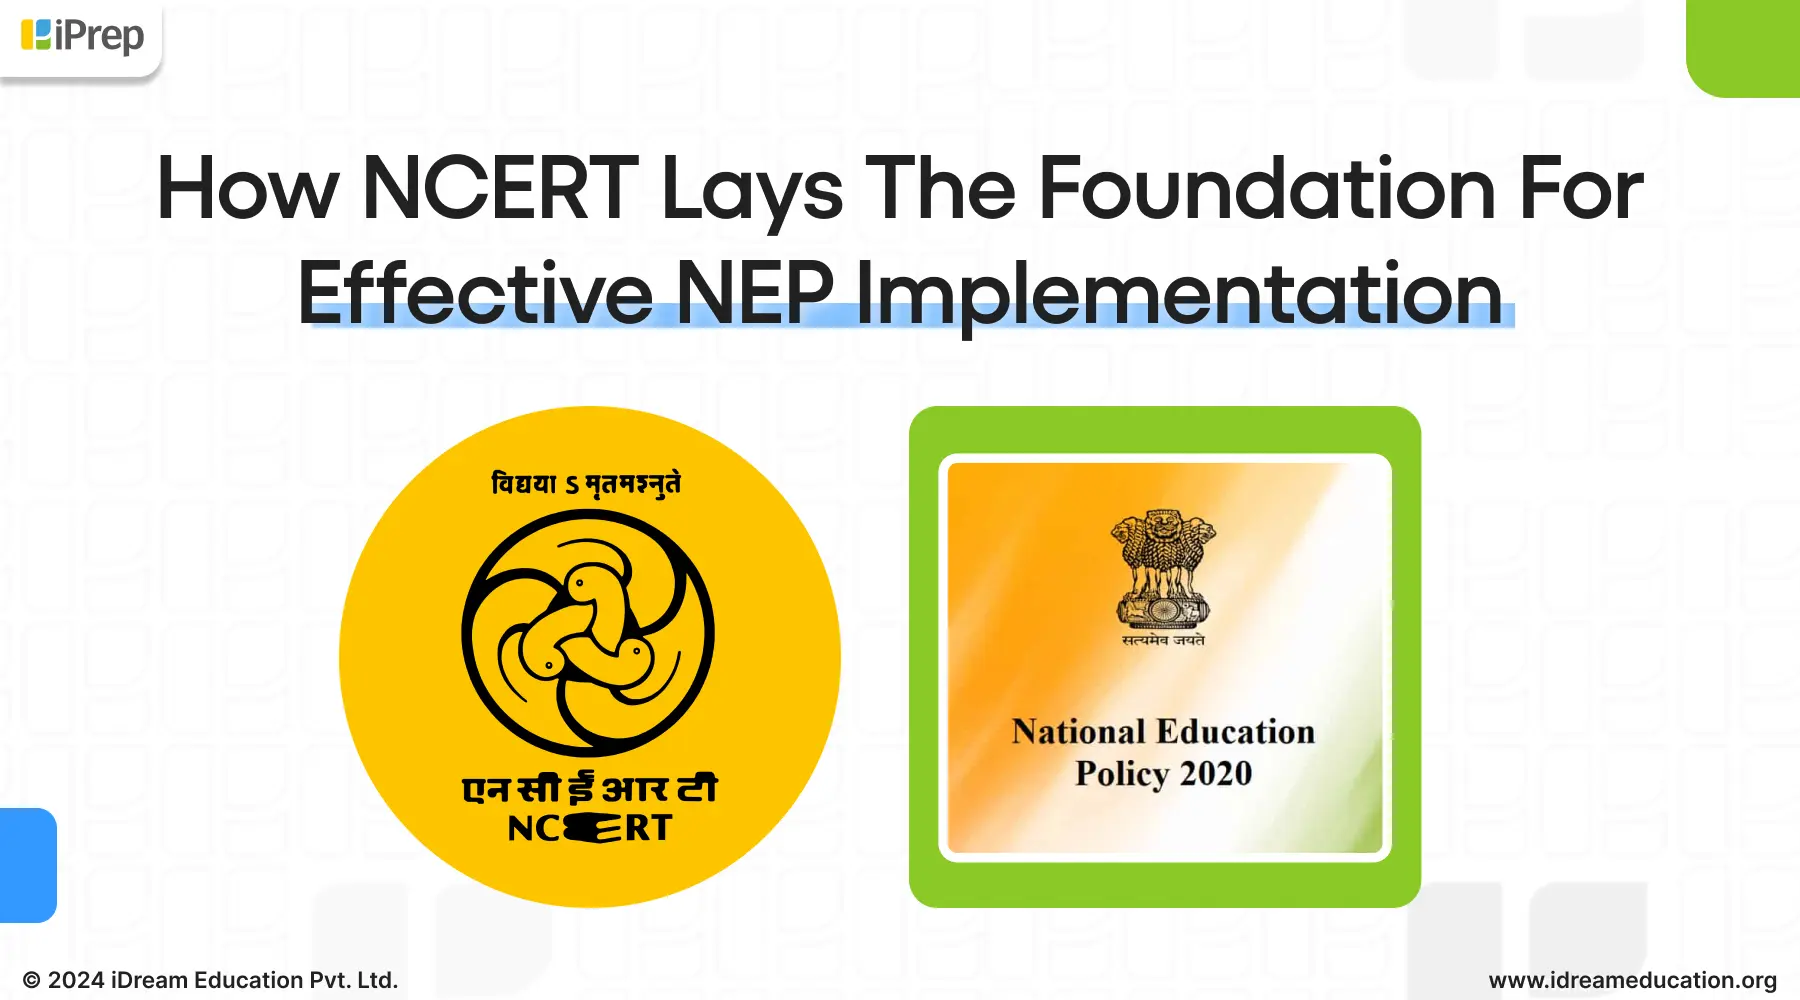 An image representing the alignment of NCERT and NEP showcasing how the NCERT lays the foundation of effective NEP Implementation